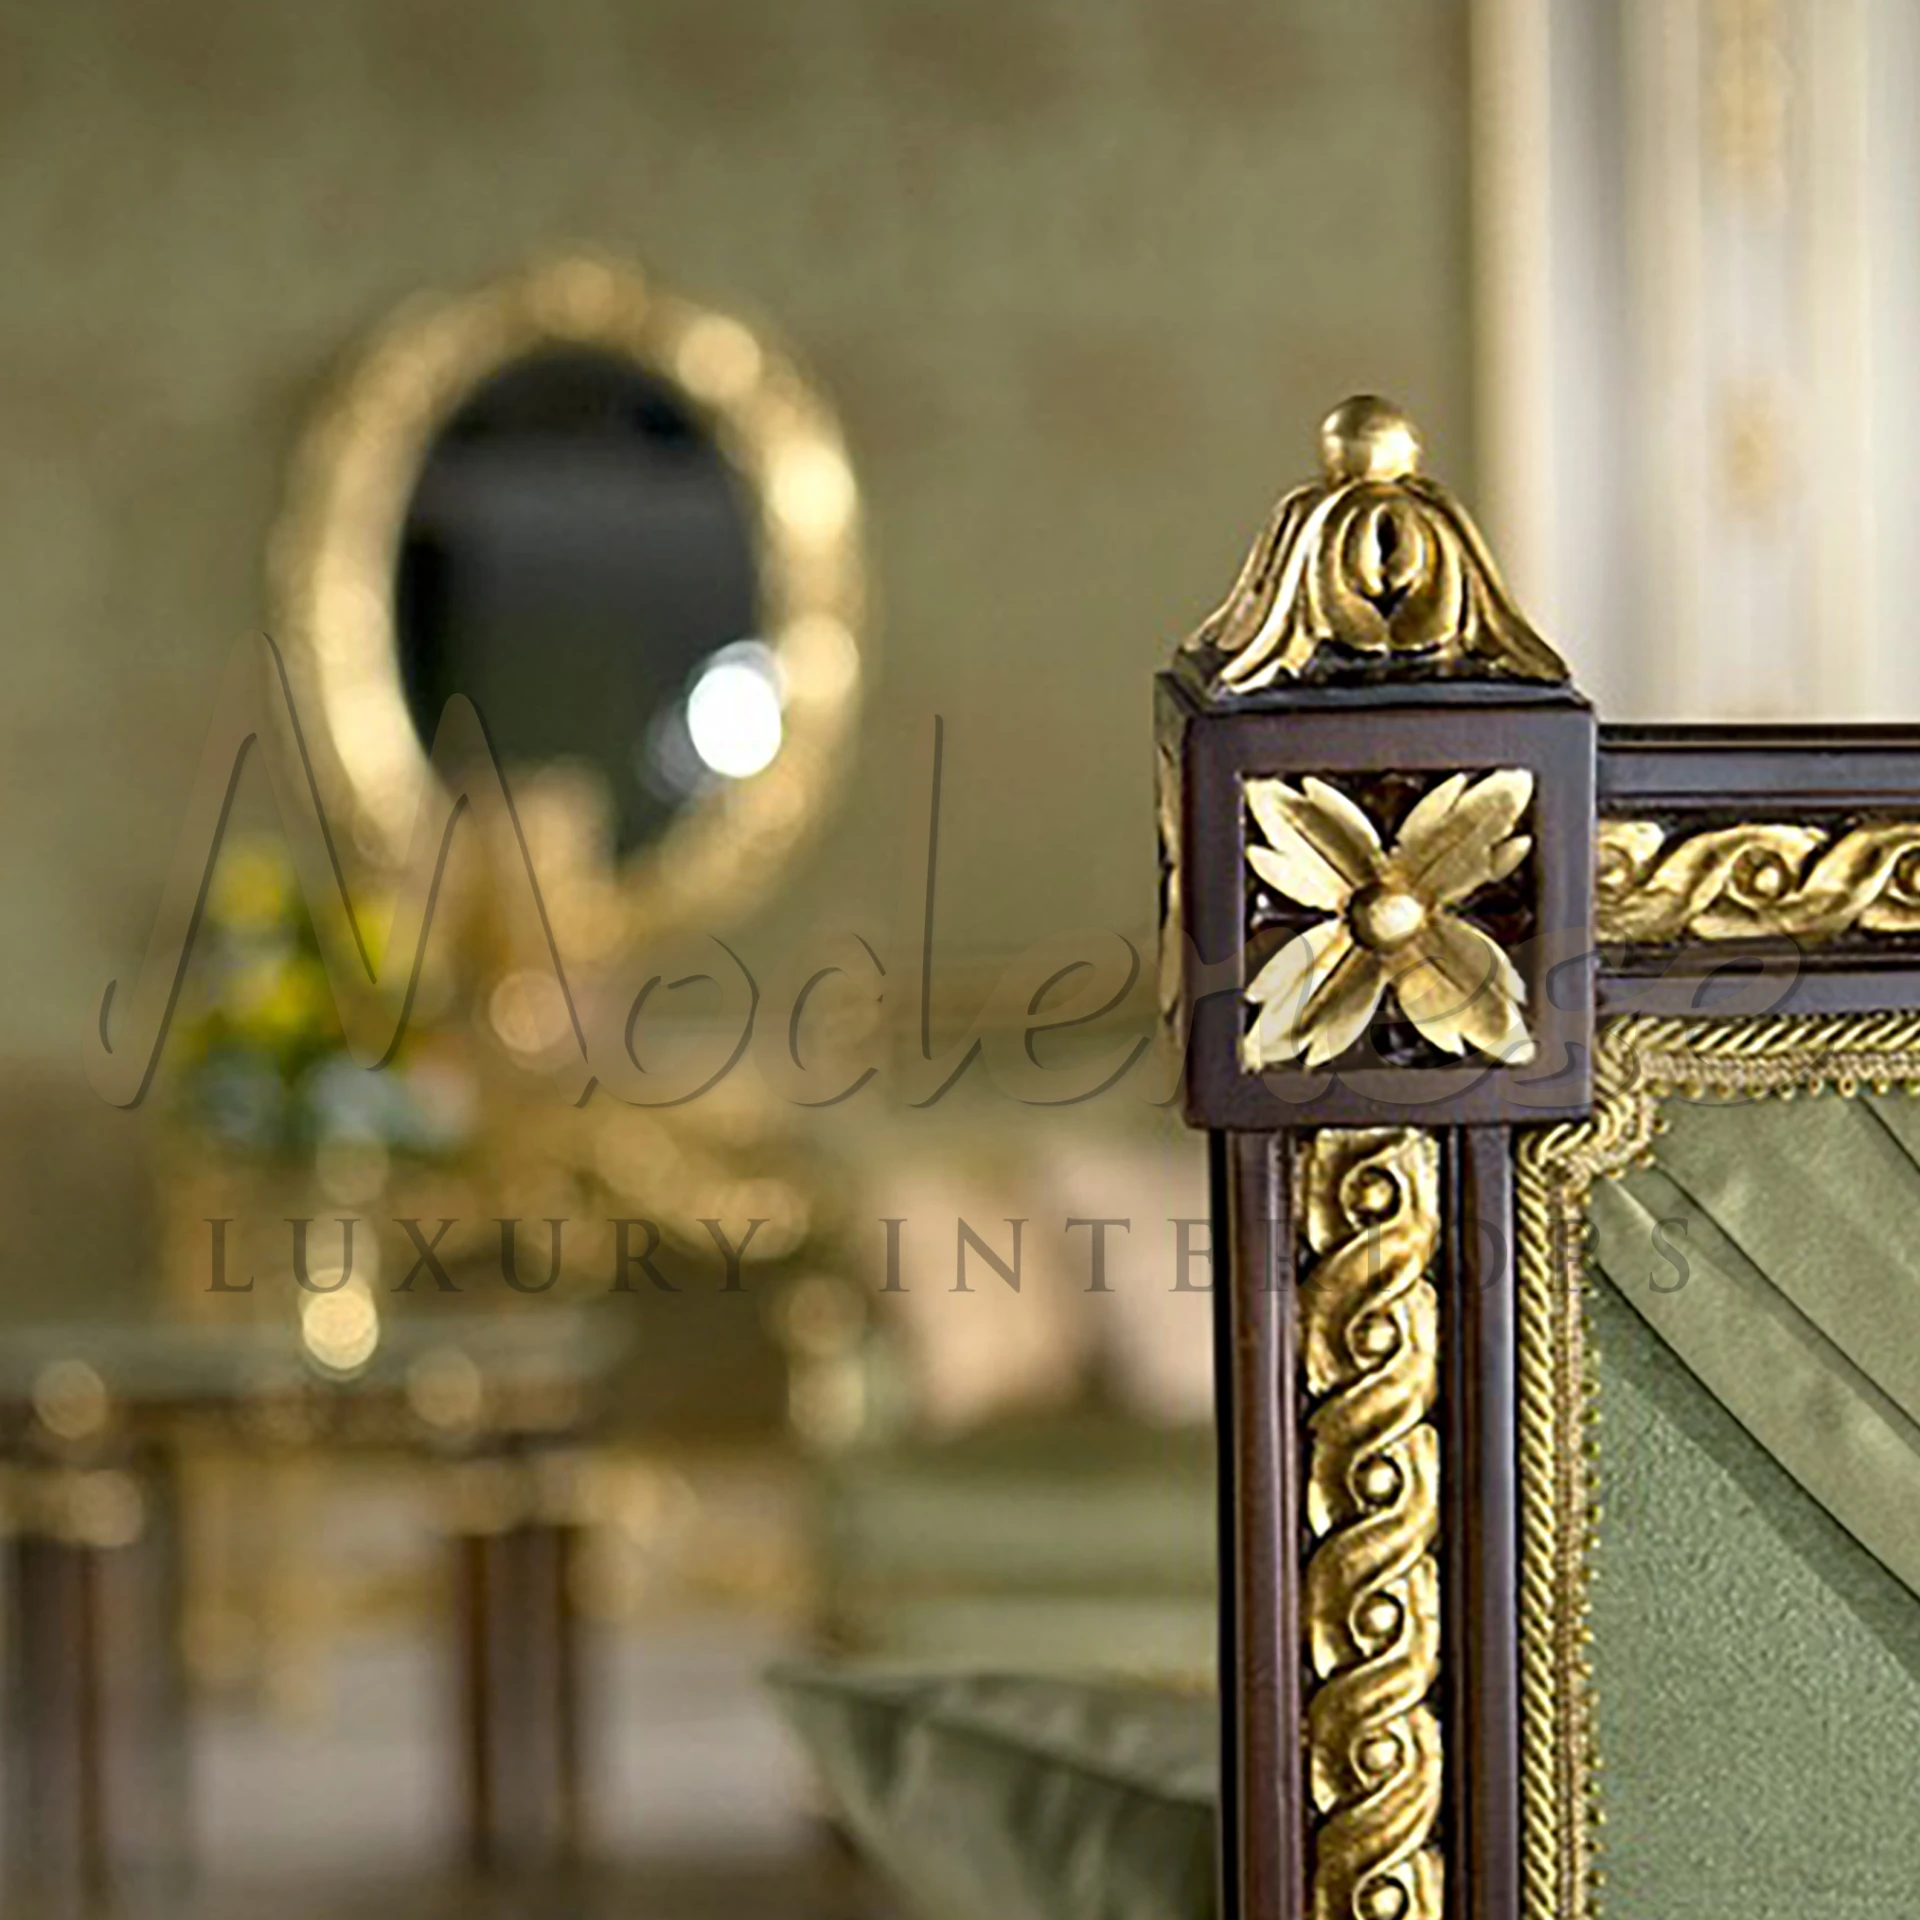 Regal green velvet armchair with ornate golden embellishments and fluted legs, reflecting a vintage Victorian elegance.